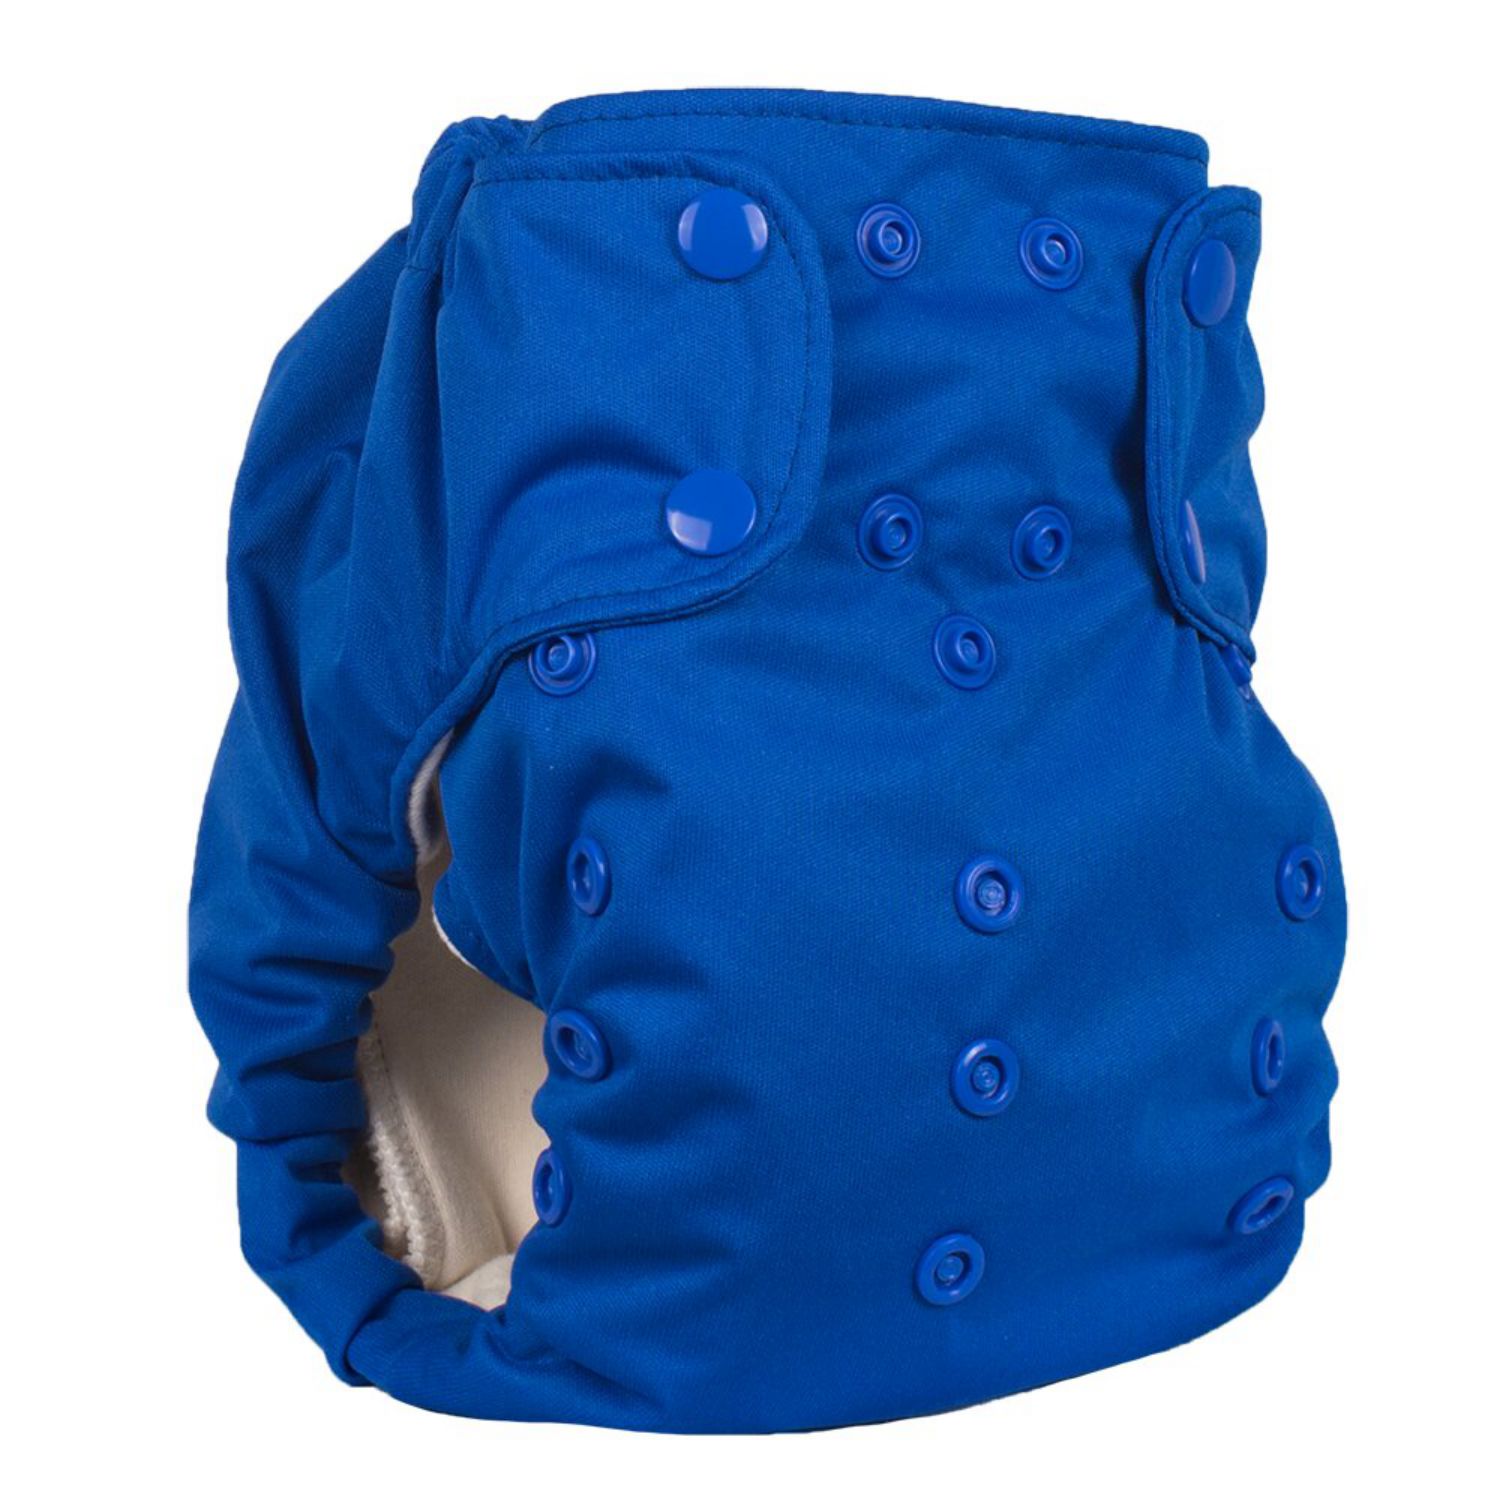 Smart Bottoms 3.1 One Size All-in-One nappy Pattern: Basic Blue